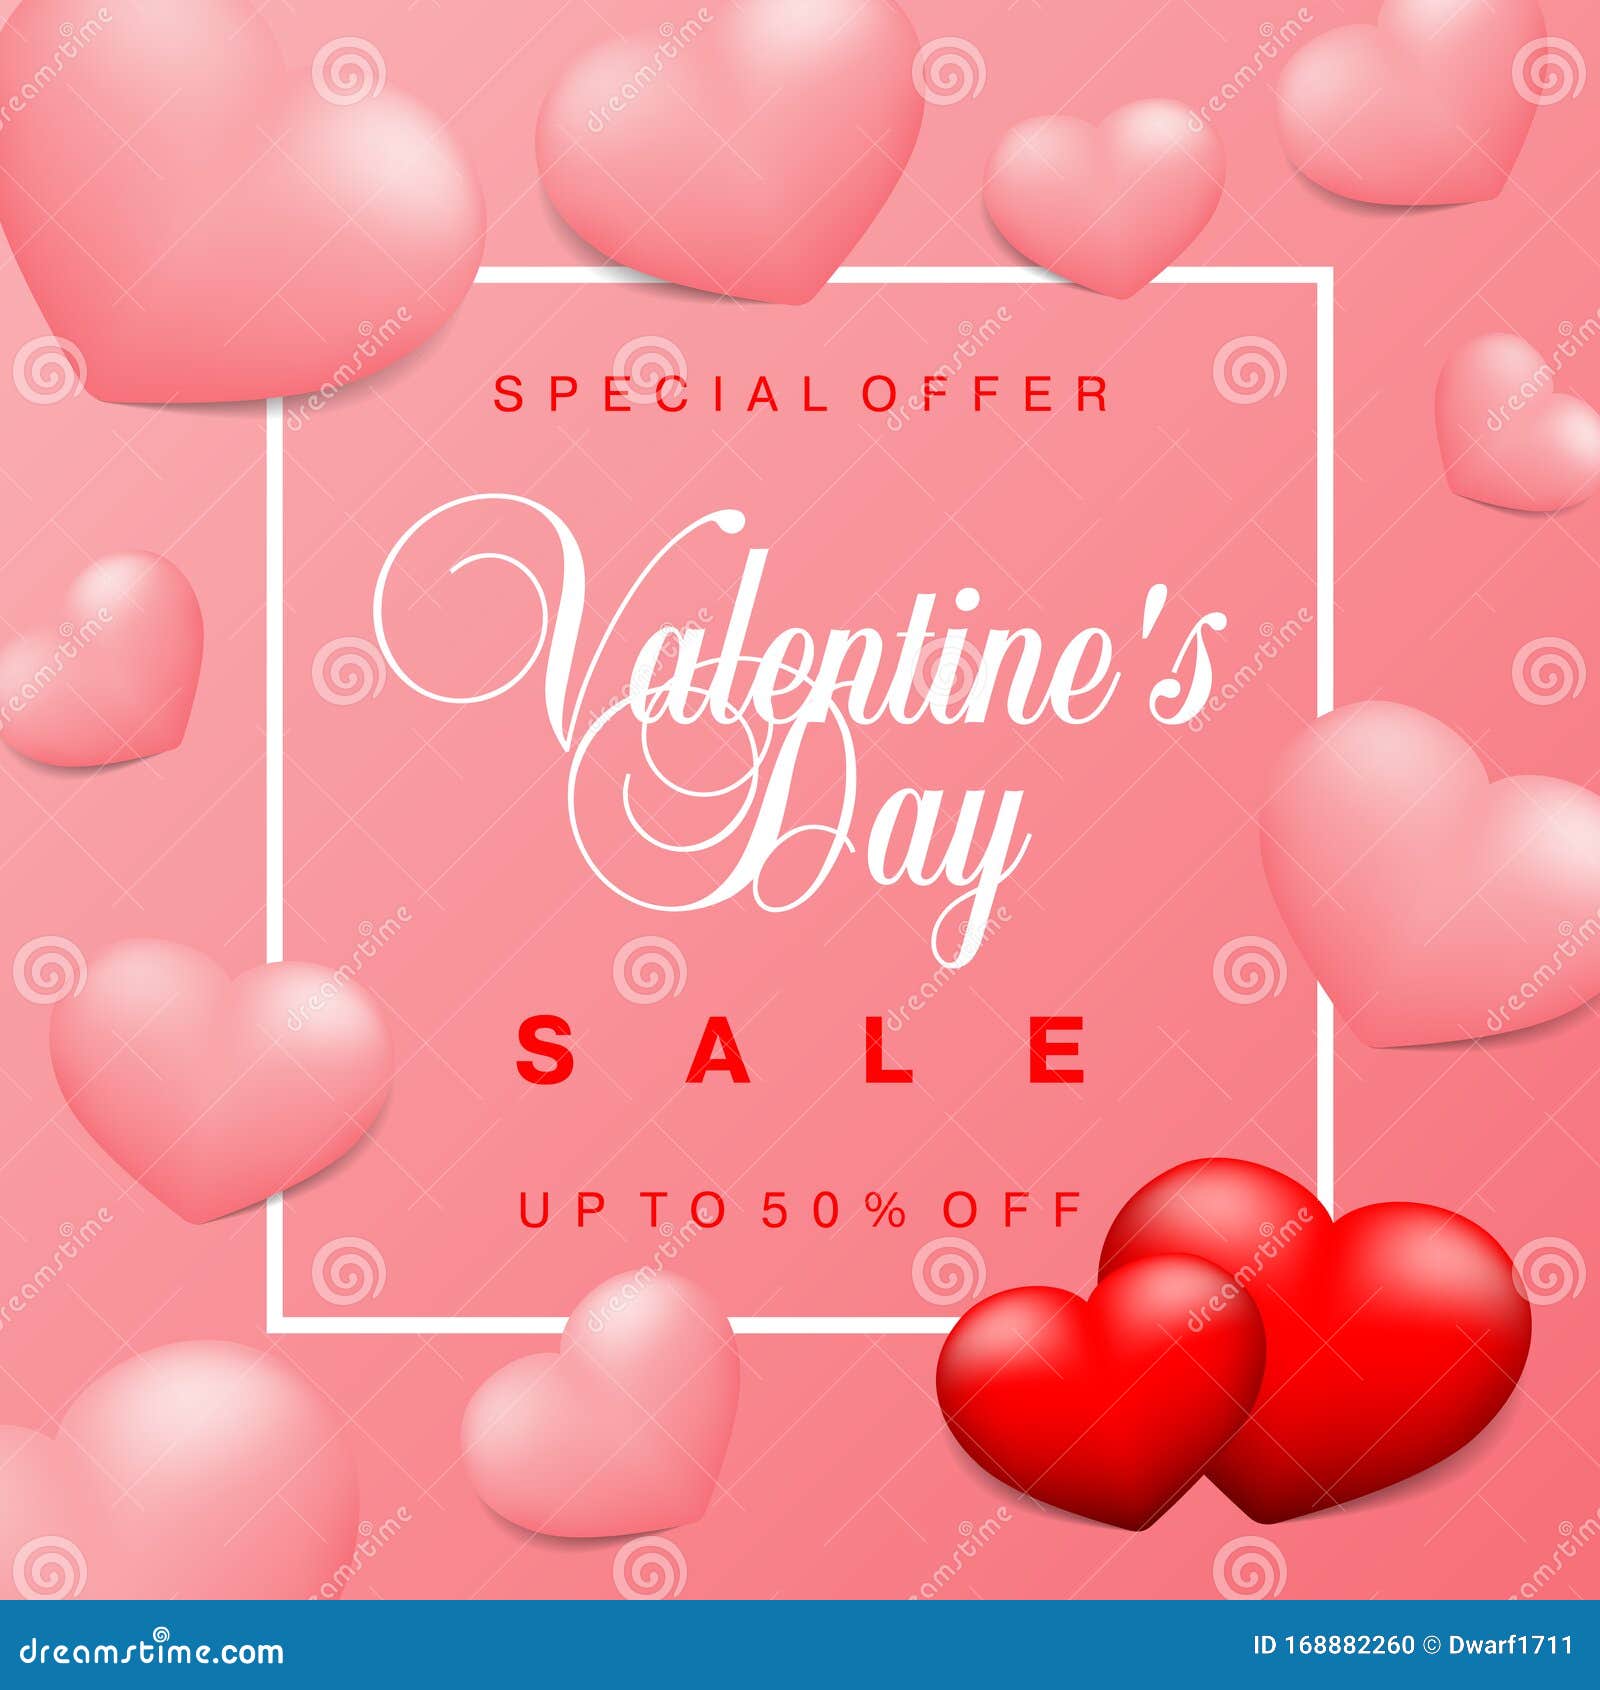 Pink Valentines Day sale special offer, discount, advertising campaign square vector banner, flyer, poster, voucher, social media post template with couple of red hearts an pink hearts 